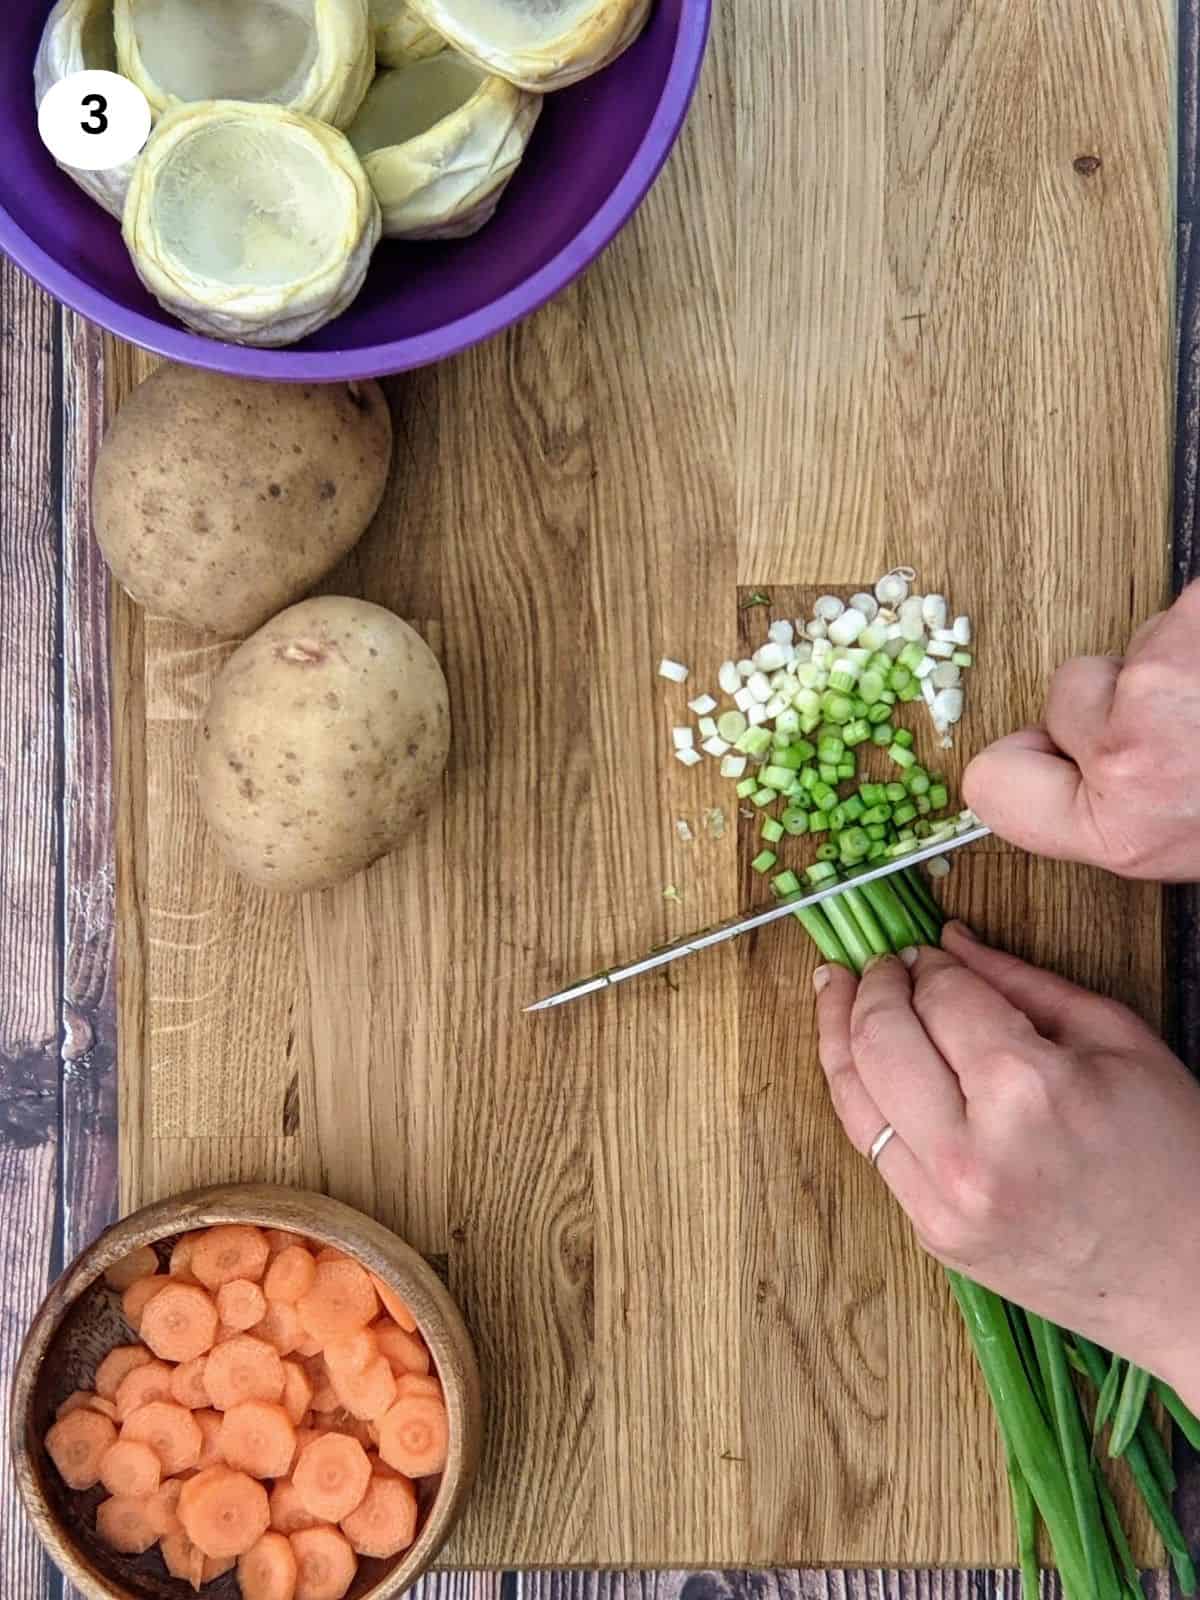 Chopping green onions in slices for artichoke stew